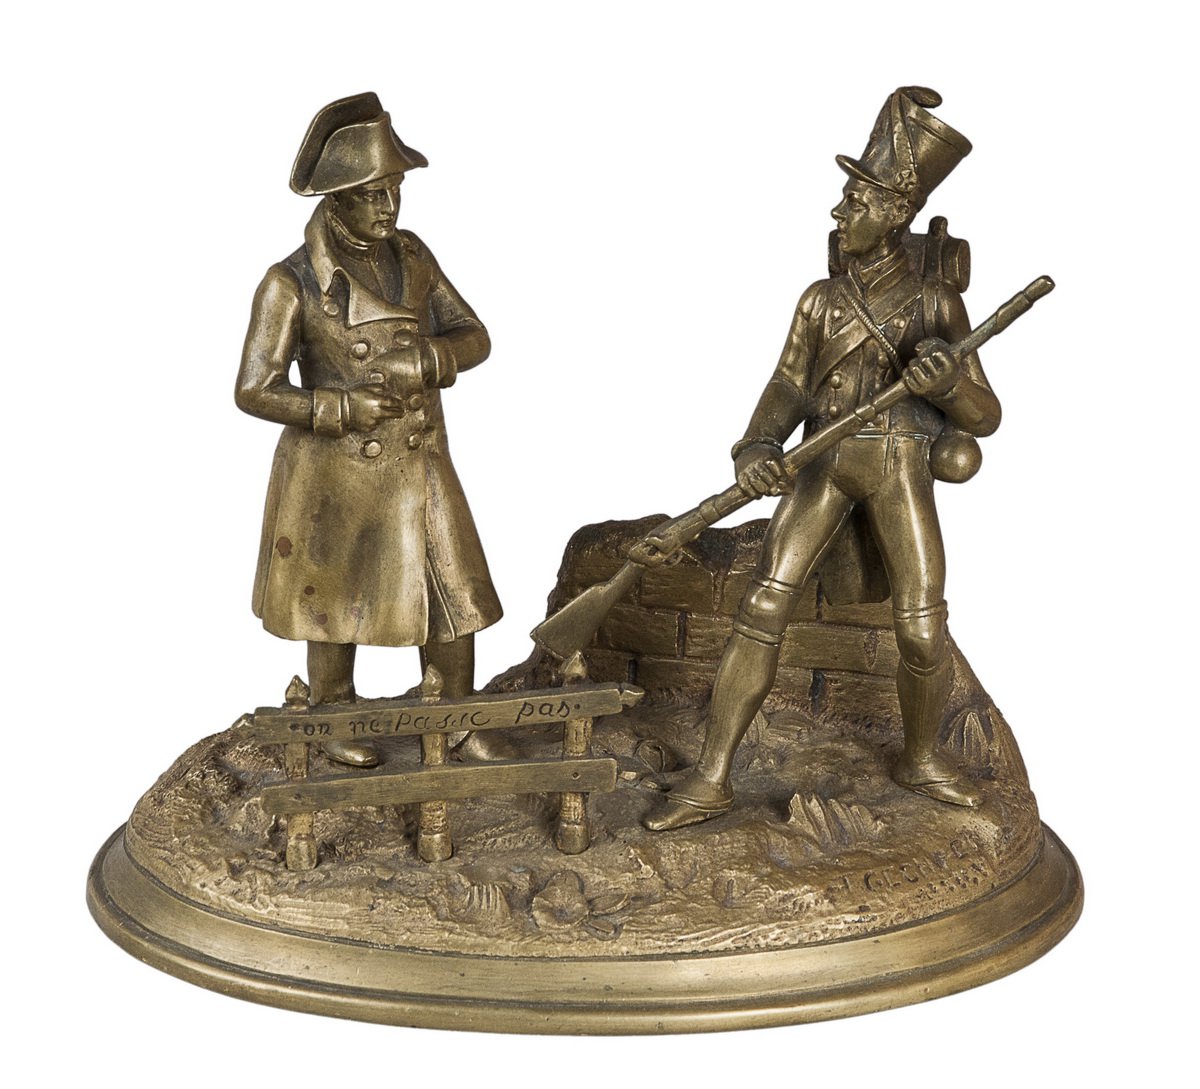 Decor Art France Bronze Sculpture Nobody shall pass Soldier on duty and Napoleon